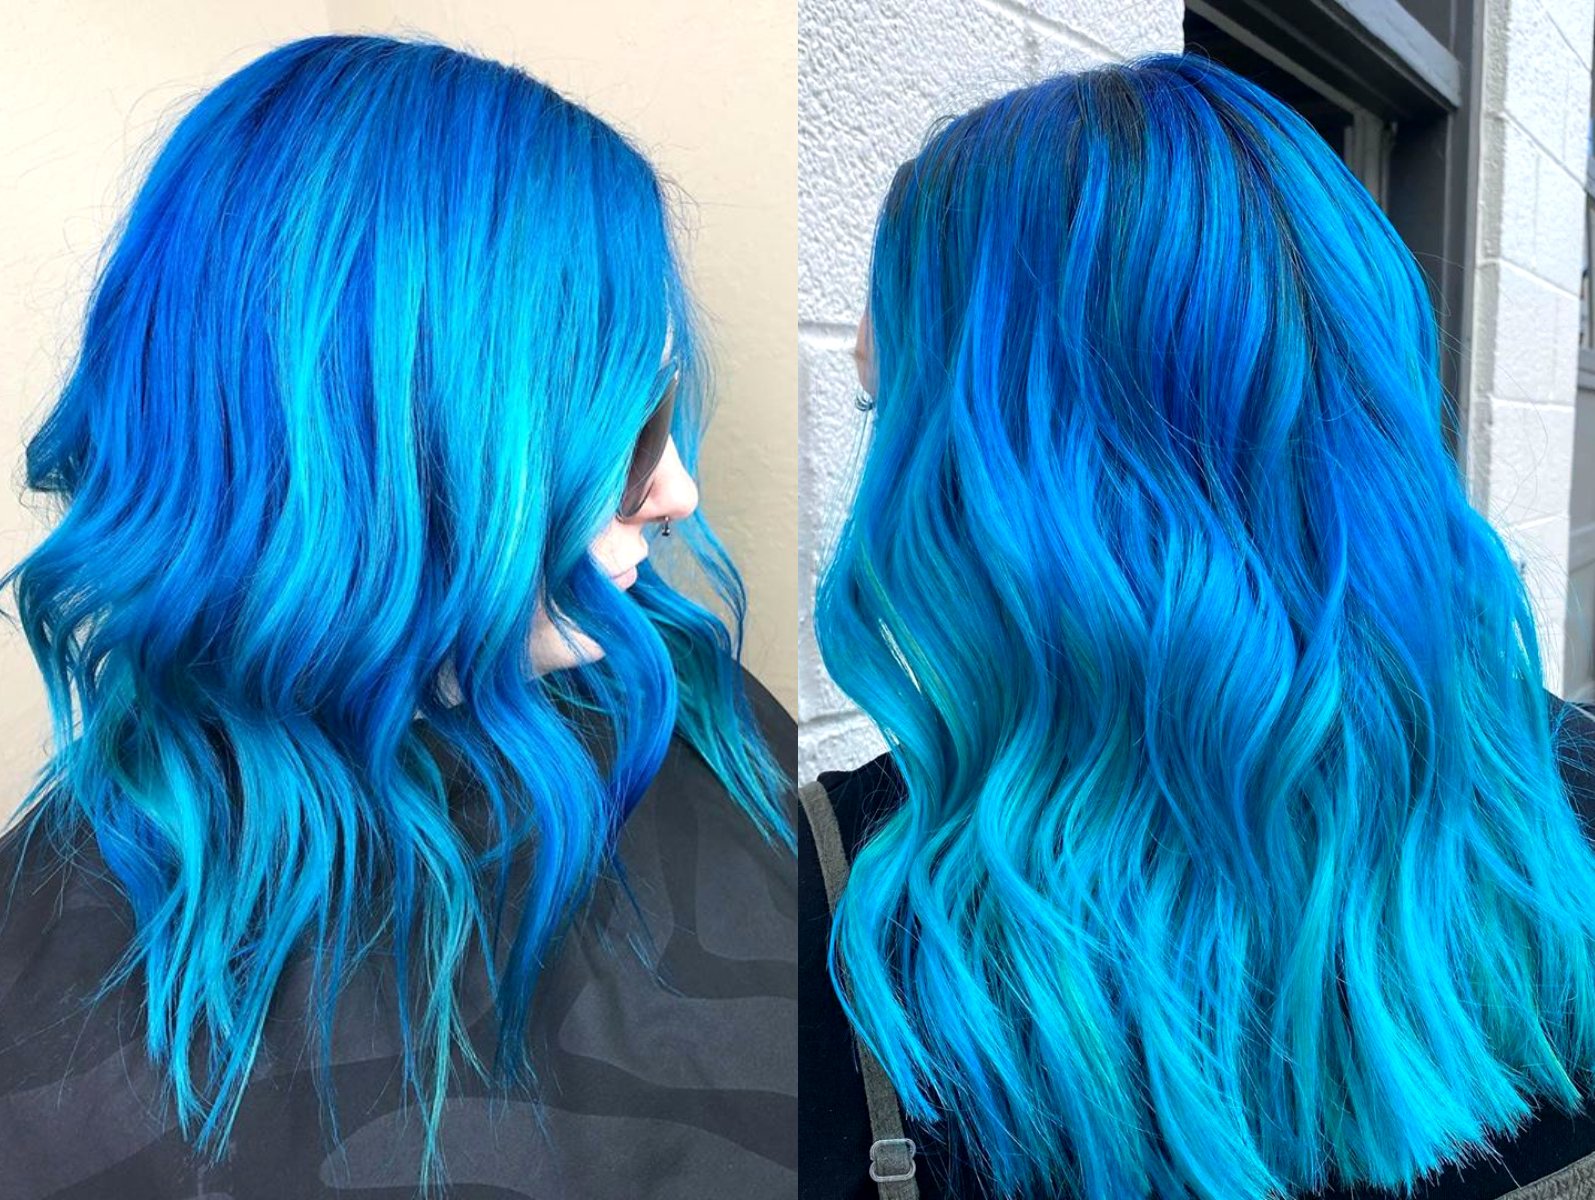 Blue balayage on medium blonde hair: Before and after - wide 1